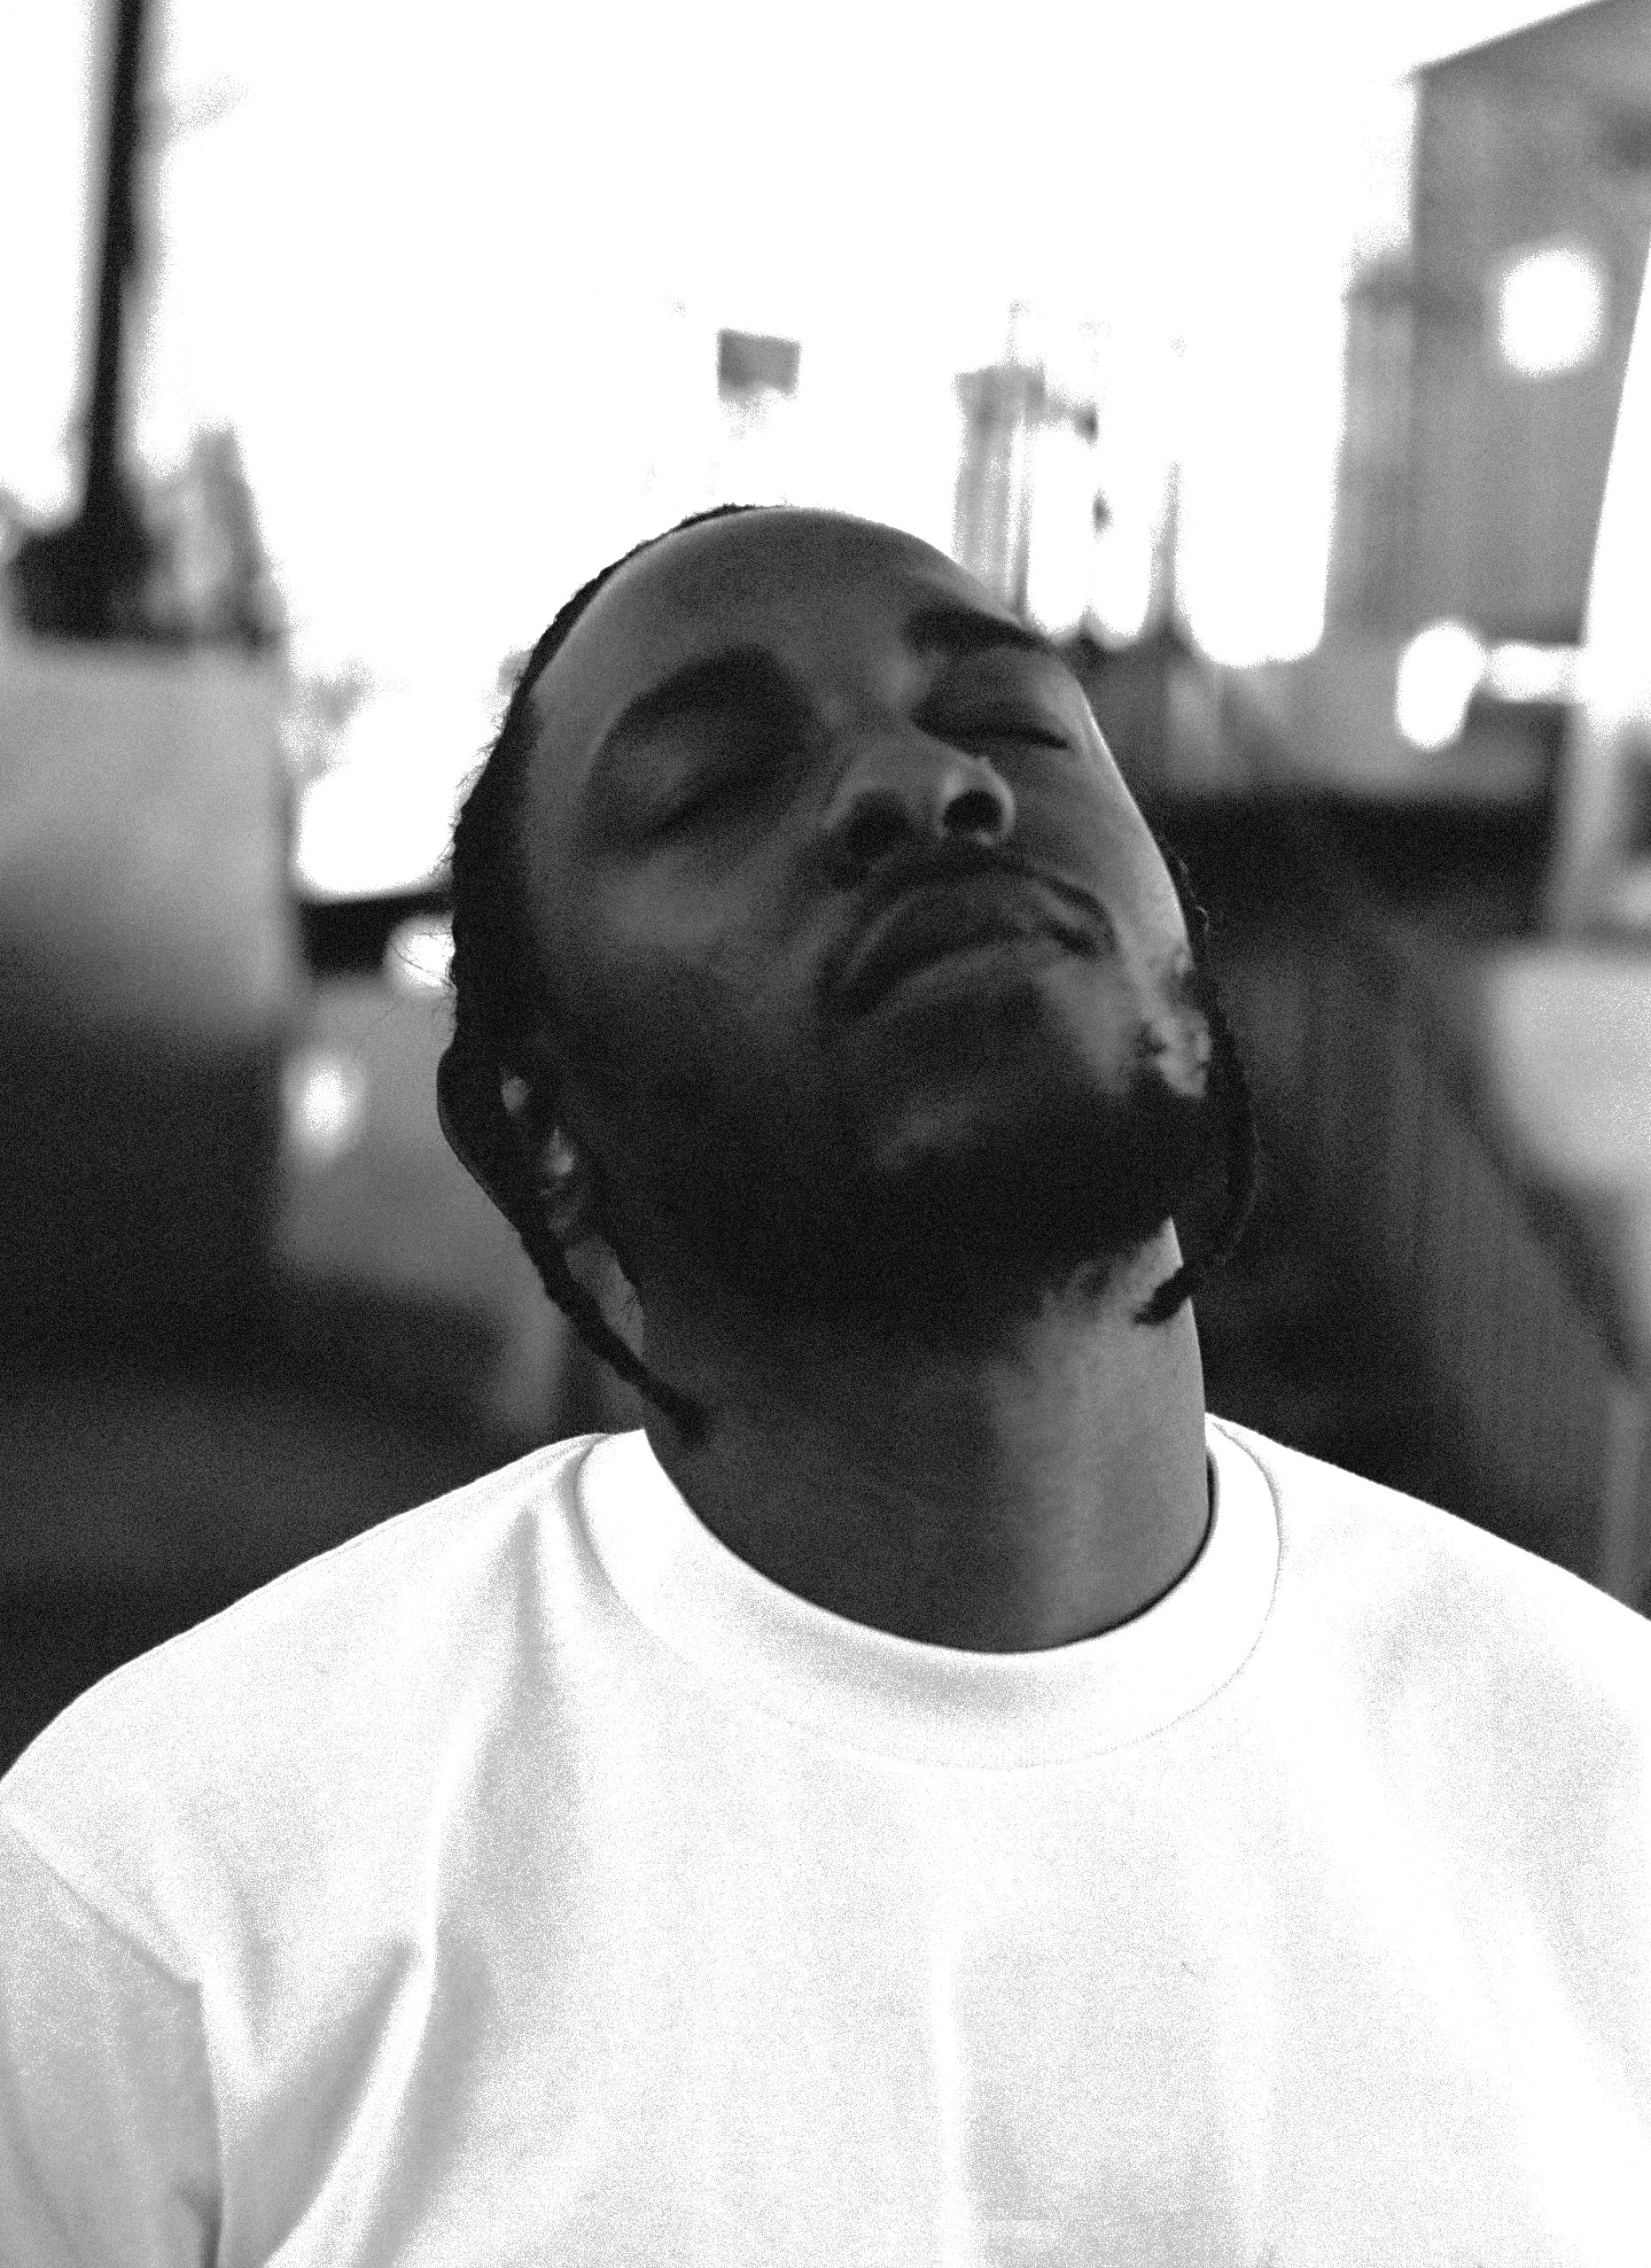 Kendrick Lamar on His Career, 'Damn,' 'To Pimp a Butterfly' and More